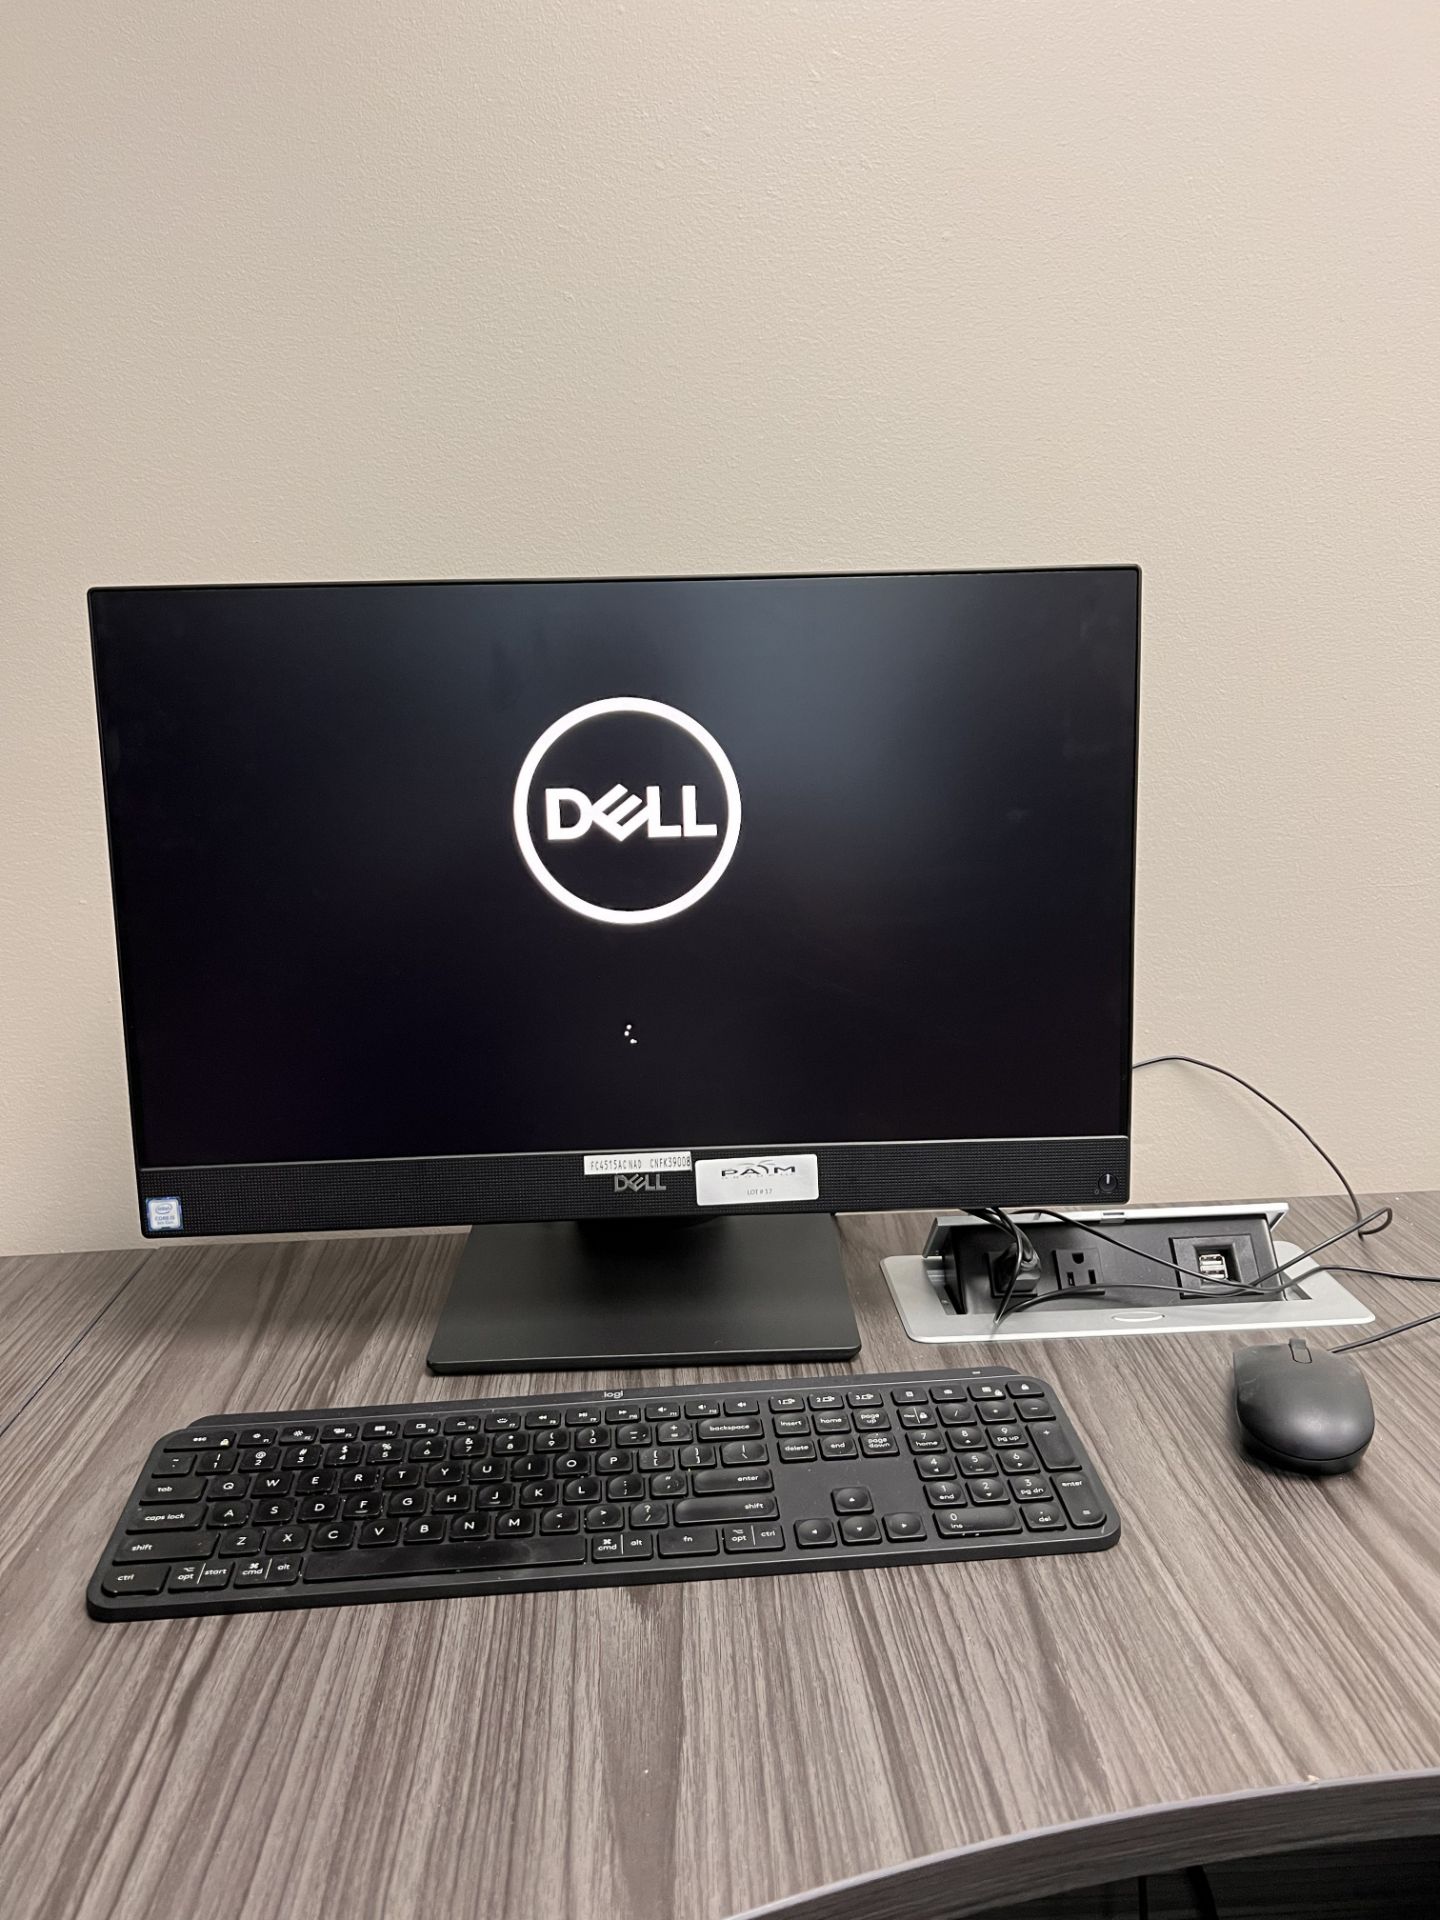 DELL ALL IN ONE INTEL I5 COMPUTER